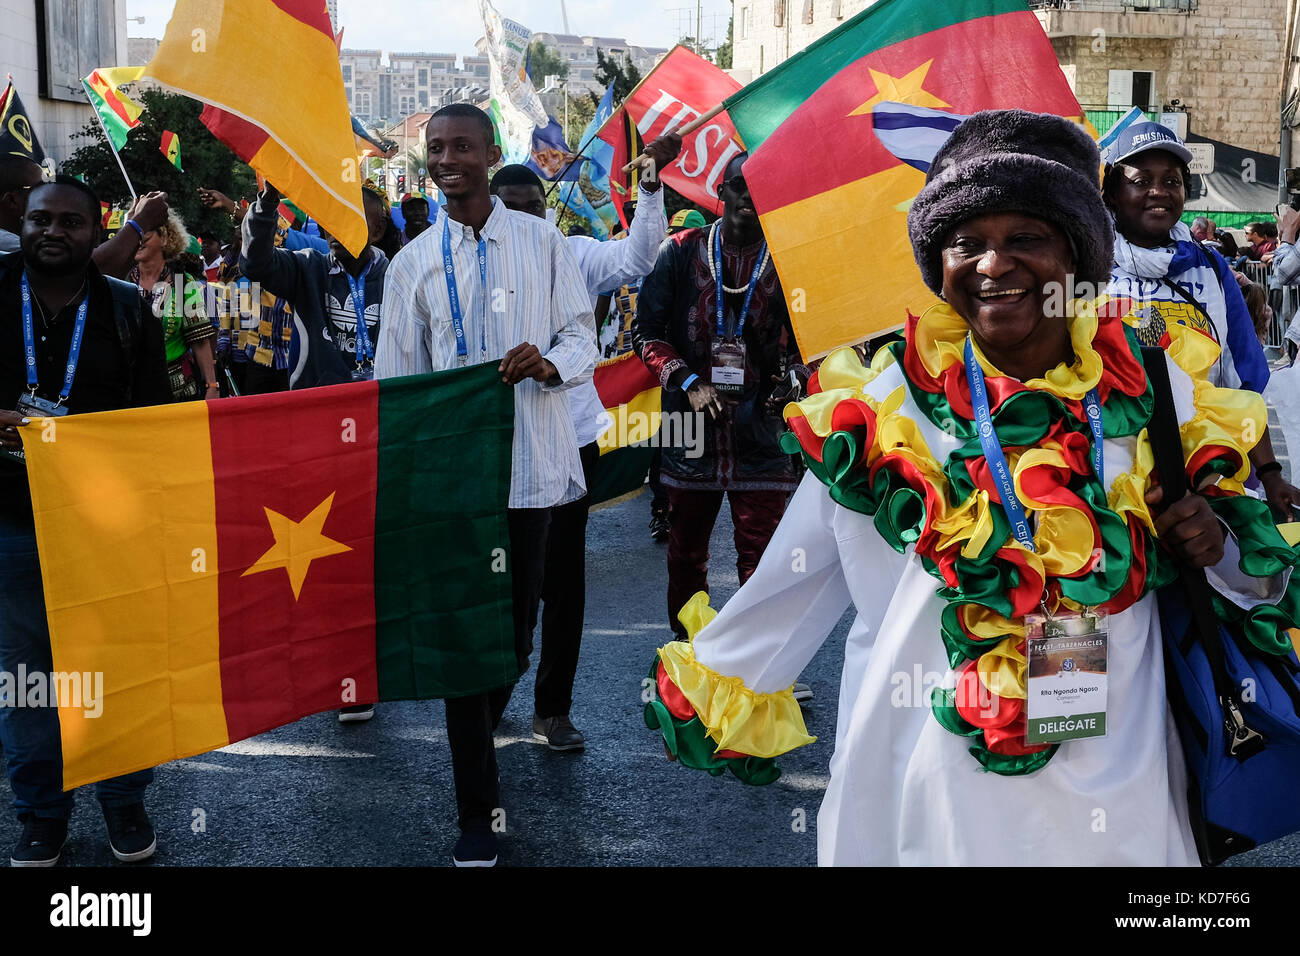 Jerusalem, Israel. 10th Oct, 2017. A member of the Cameroon delegation to the International Christian Embassy Jerusalem annual Feast of Tabernacles marches up Bezalel Street in the annual Jerusalem Parade. Tens of thousands marched in the annual Jerusalem Parade including delegations from around the world, Israeli industry, banks, emergency and military personnel, in the tradition of Temple Mount pilgrimages on the holiday of Sukkoth and in a show of international support for Israel. Credit: Nir Alon/Alamy Live News Stock Photo